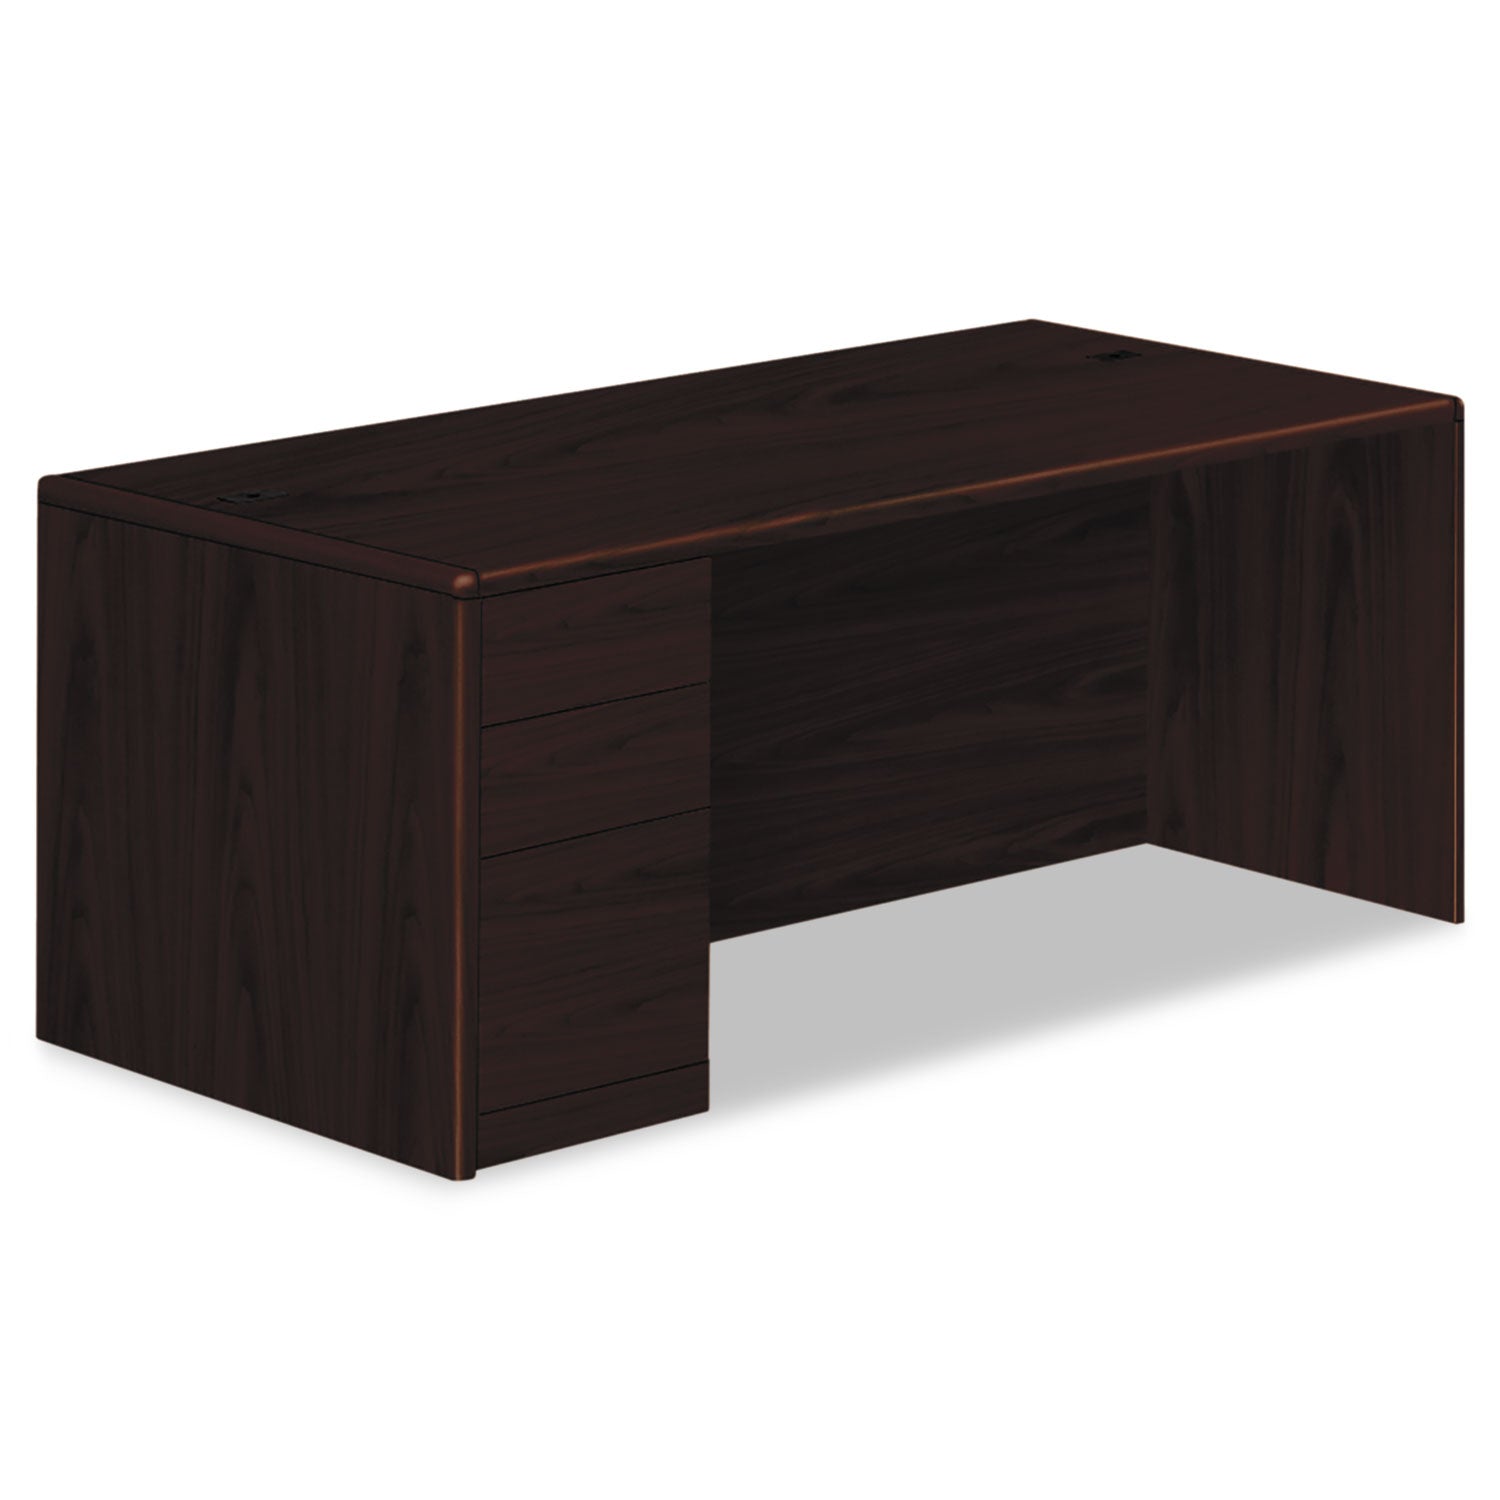 10700 Series Single Pedestal Desk with Full-Height Pedestal on Left, 72" x 36" x 29.5", Mahogany - 